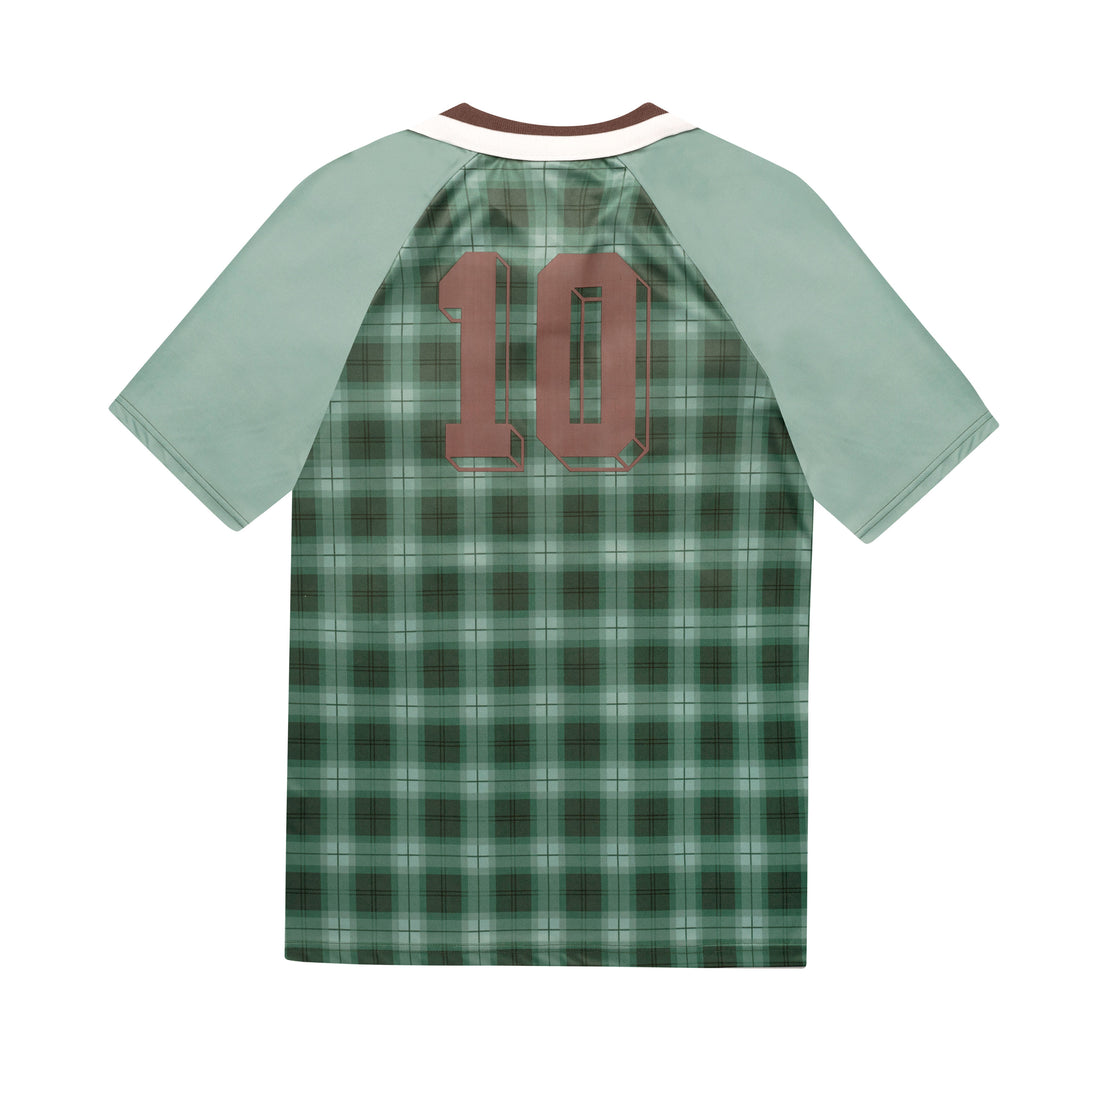 THE GREEN SOCCER JERSEY